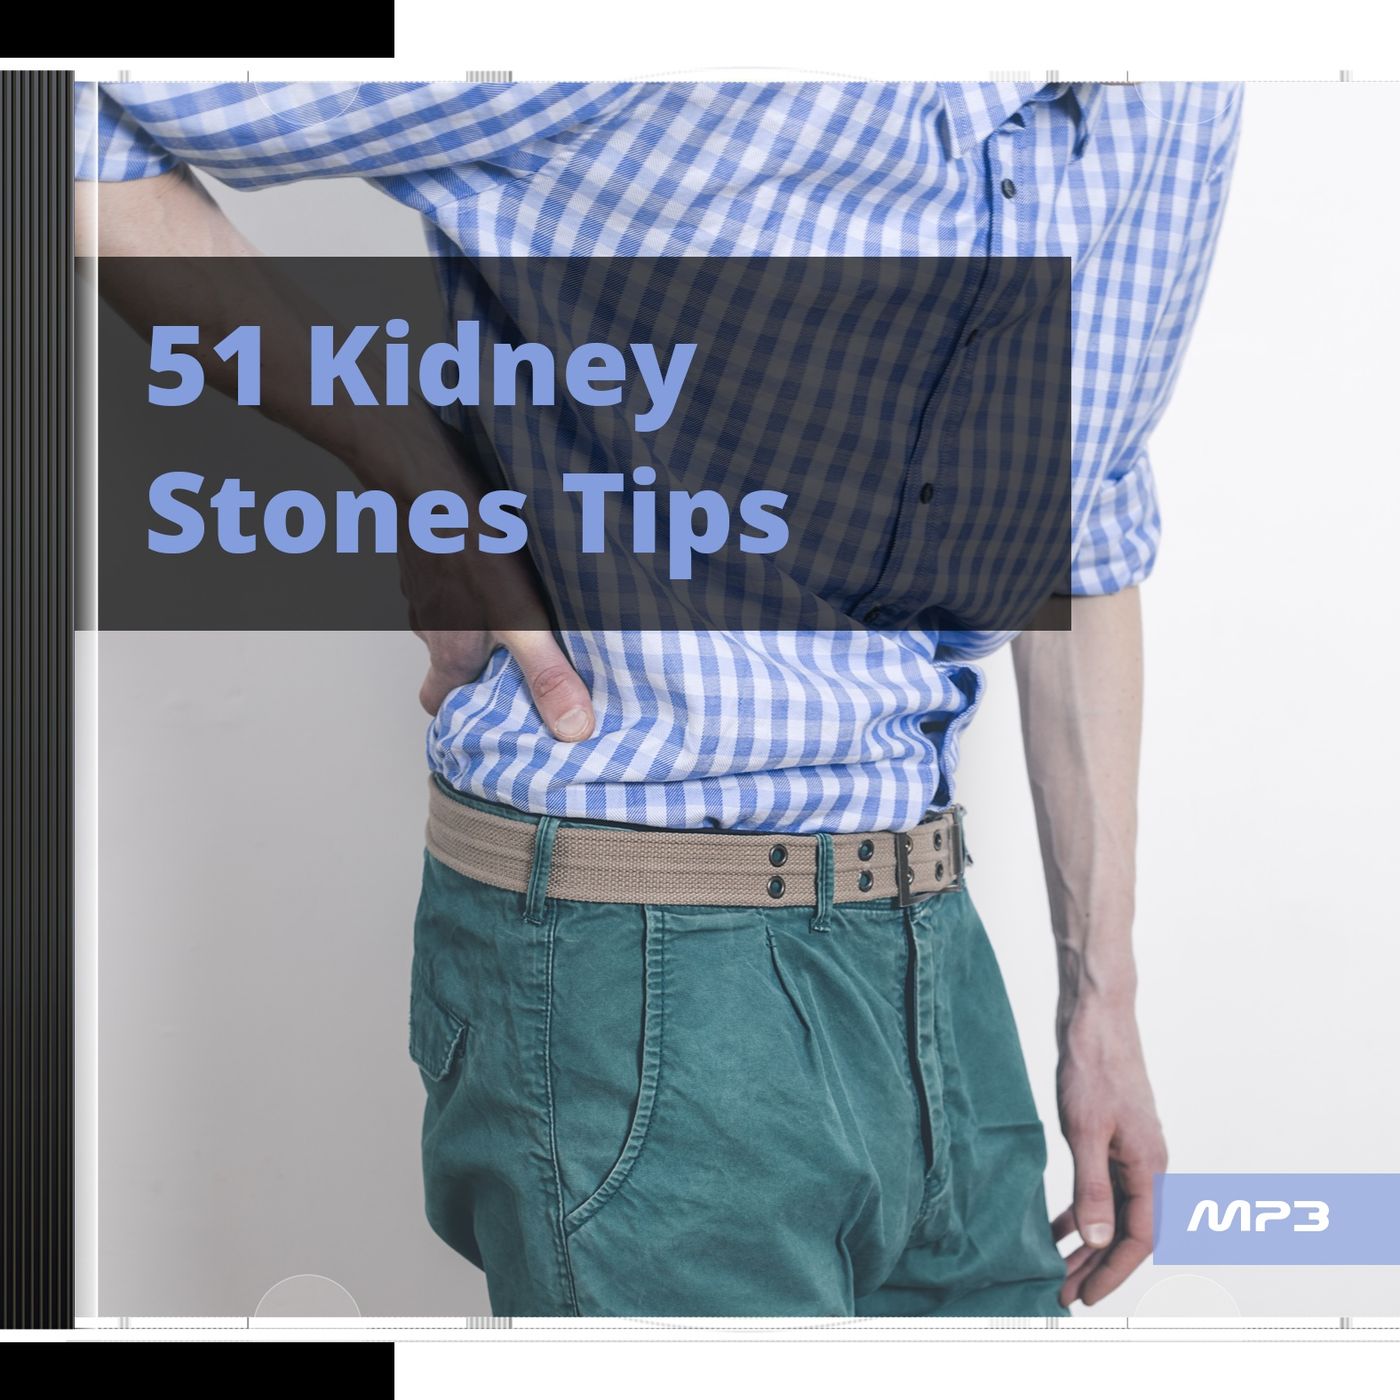 Listen to these 51 Tips to know more about kidney stones